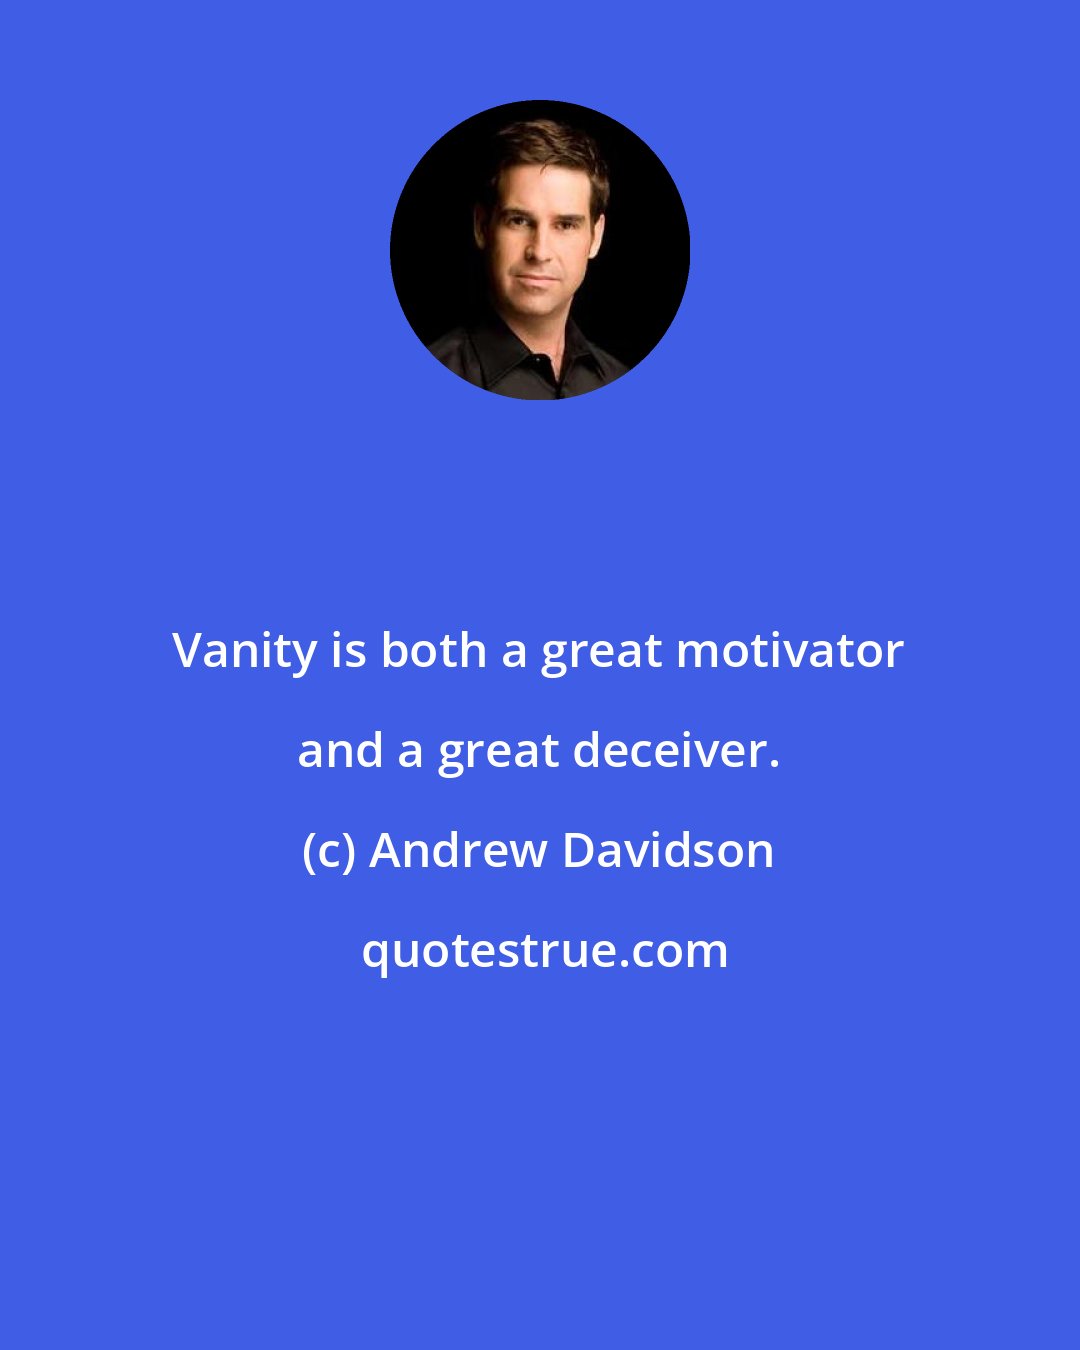 Andrew Davidson: Vanity is both a great motivator and a great deceiver.